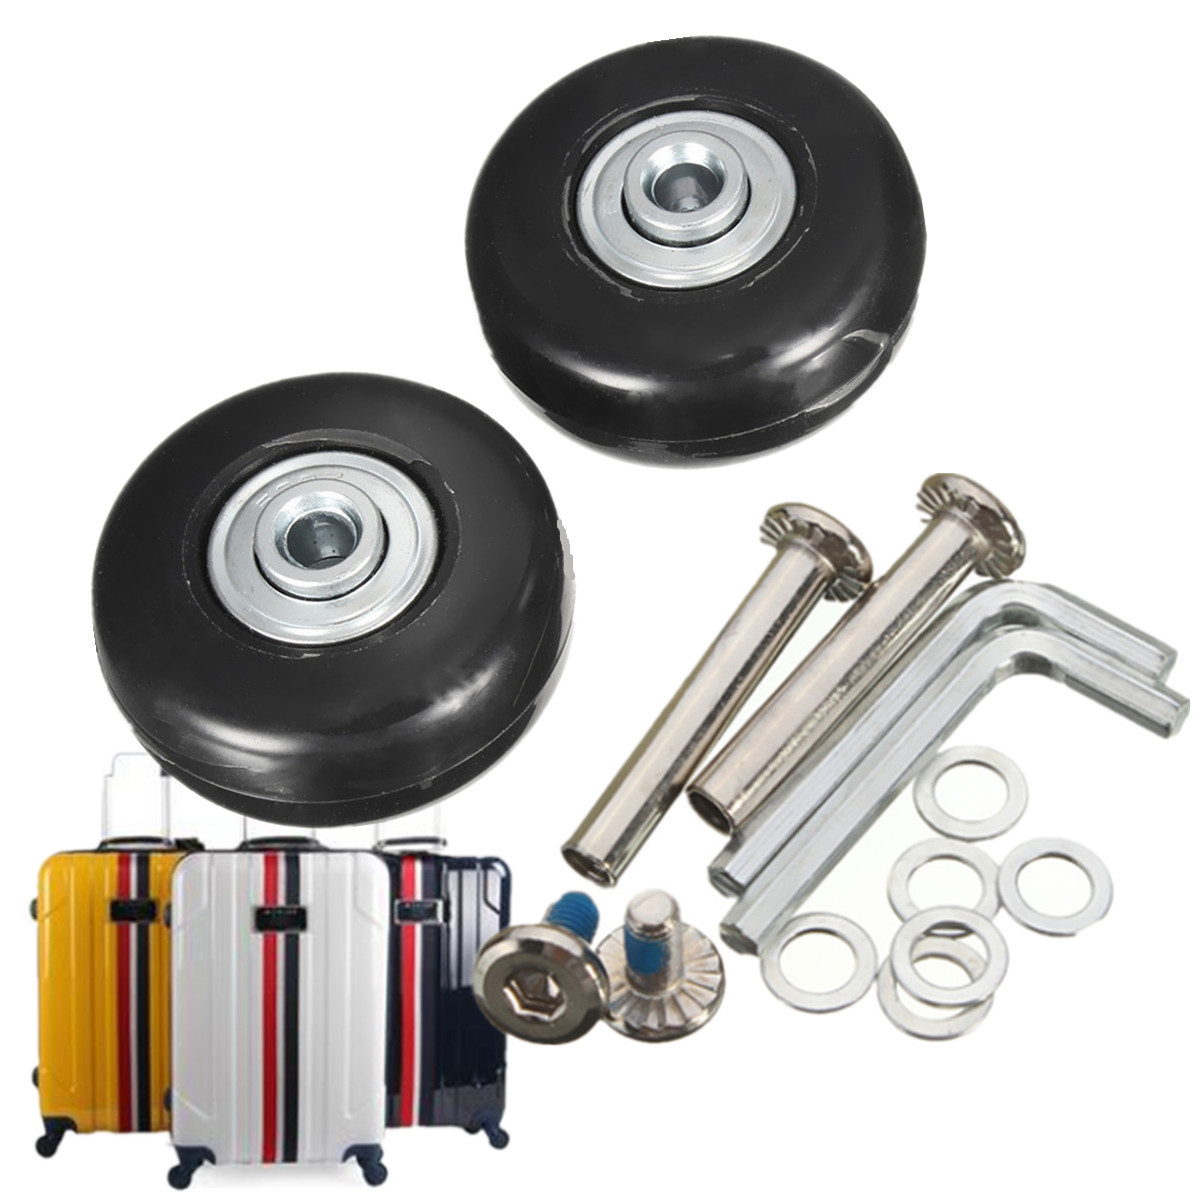 2-Sets-Luggage-Suitcase-Replacement-Wheels-OD-43-ID-6-W-18-Axles-30-Repair-Tools-1005576-7